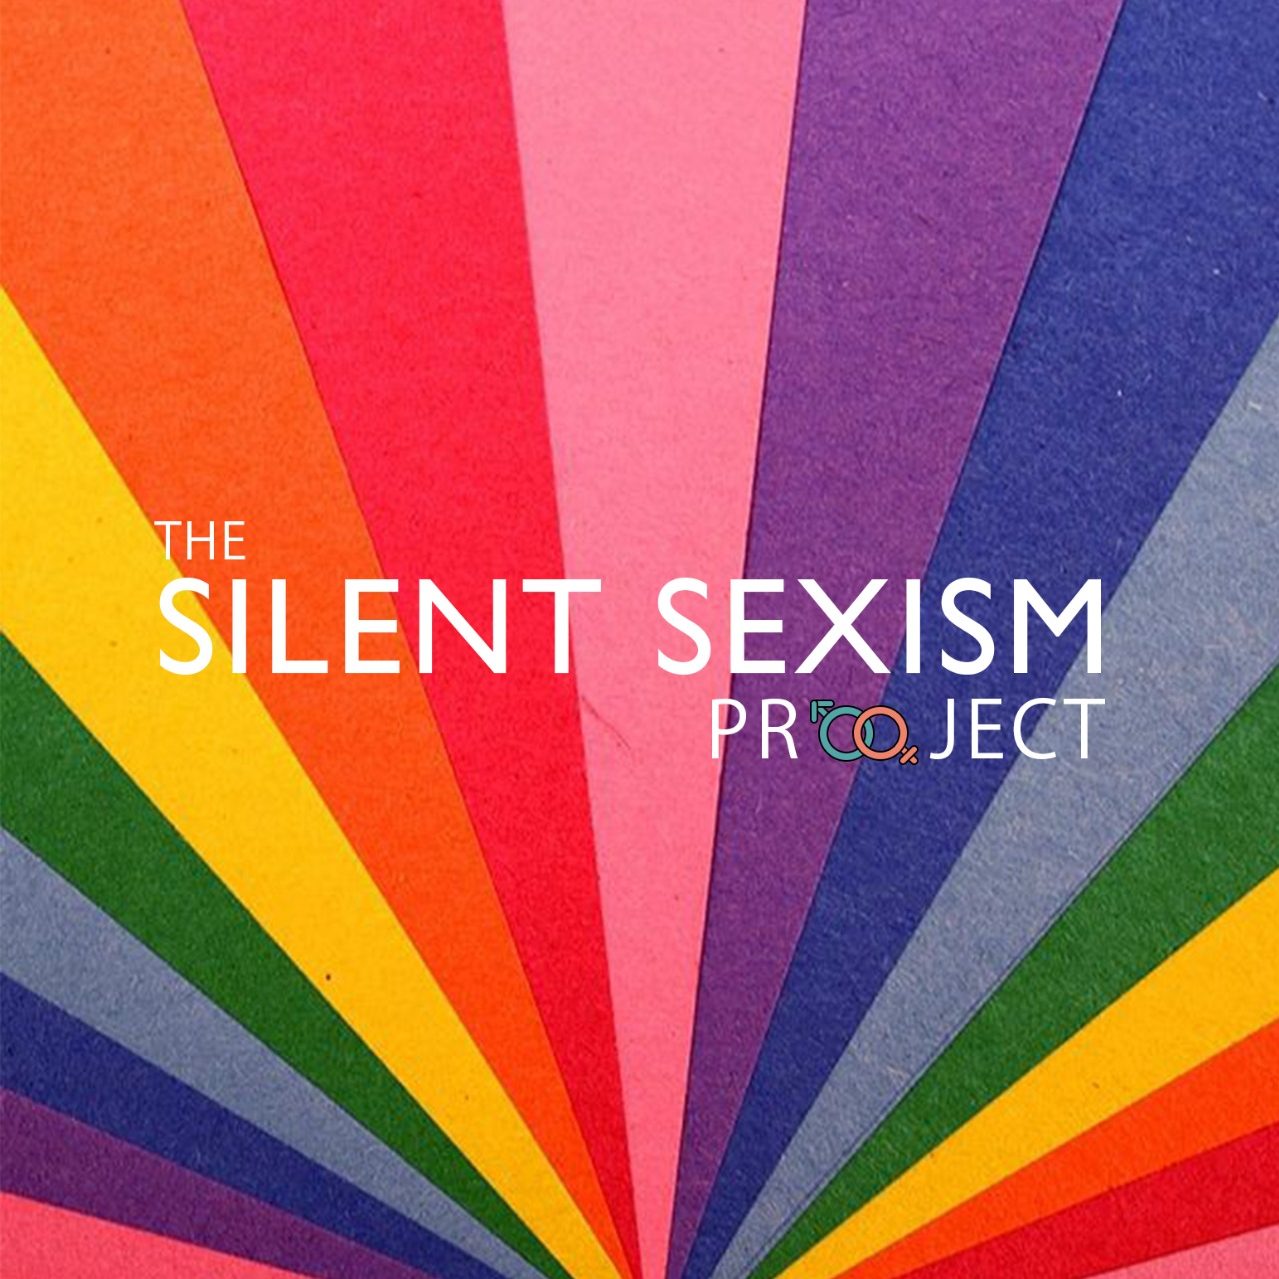 The Silent Sexism Project